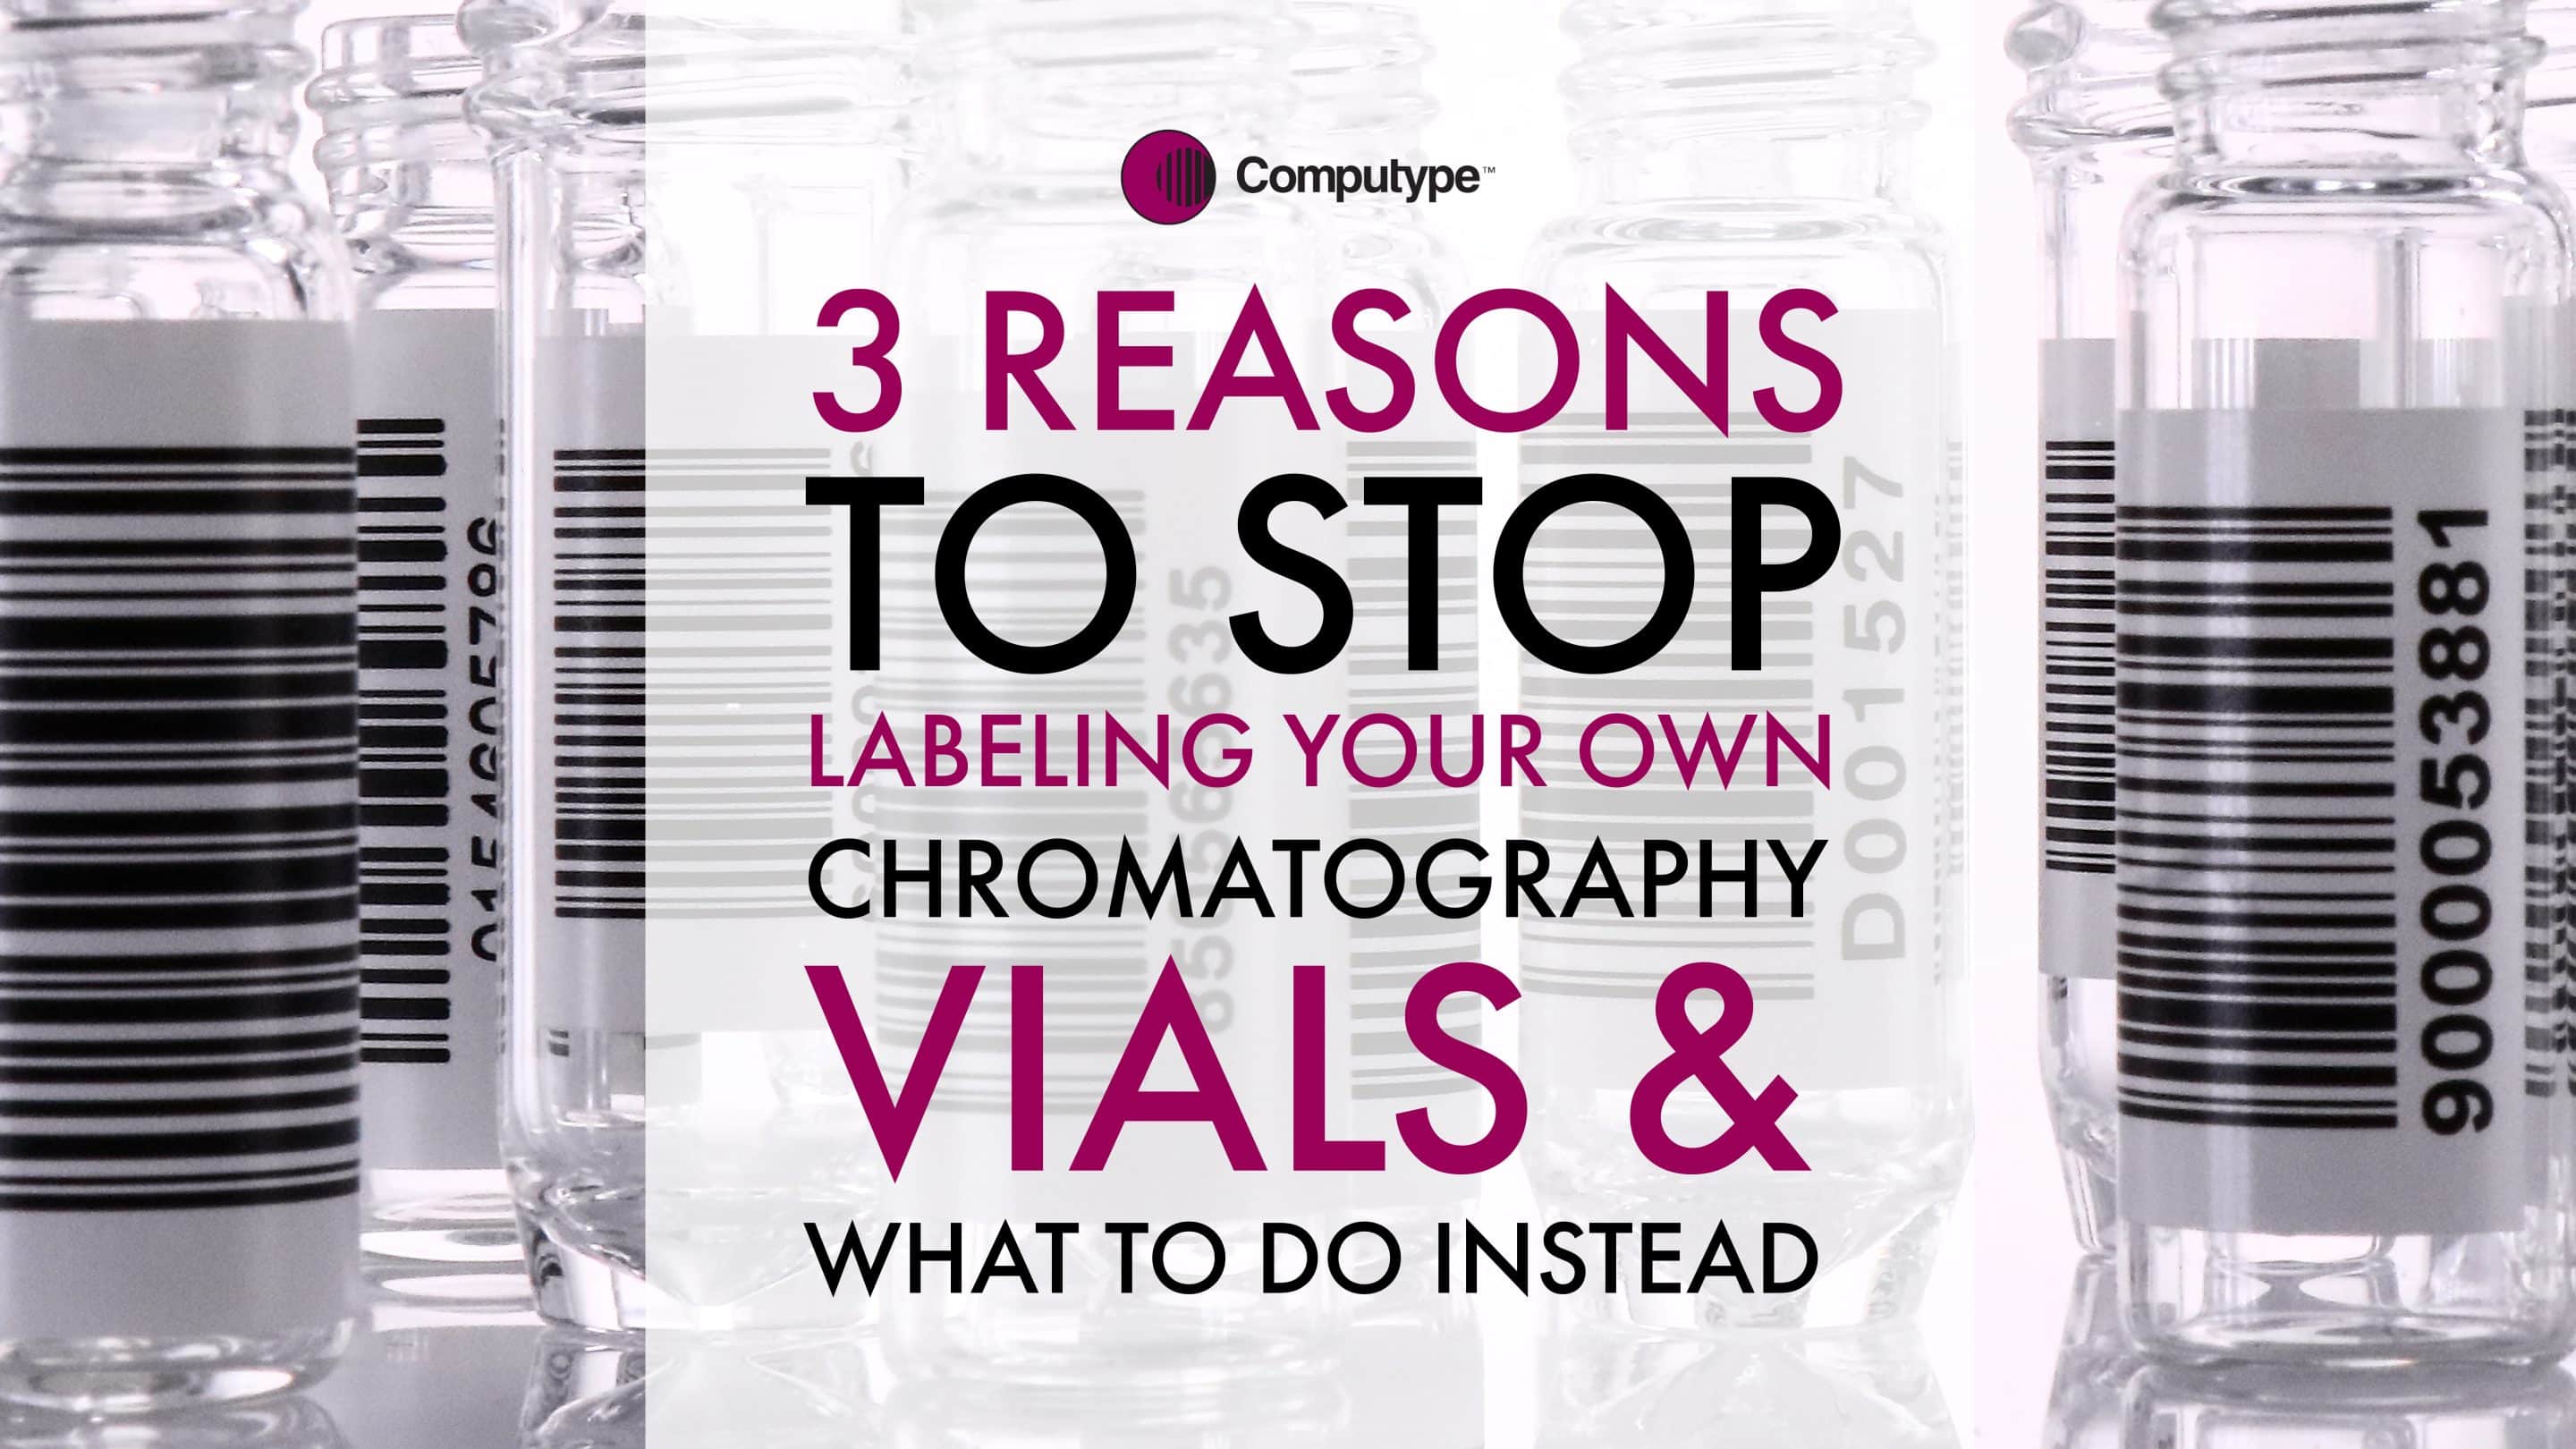 3 Reasons to Stop Hand Labeling Your Chromatography Vials